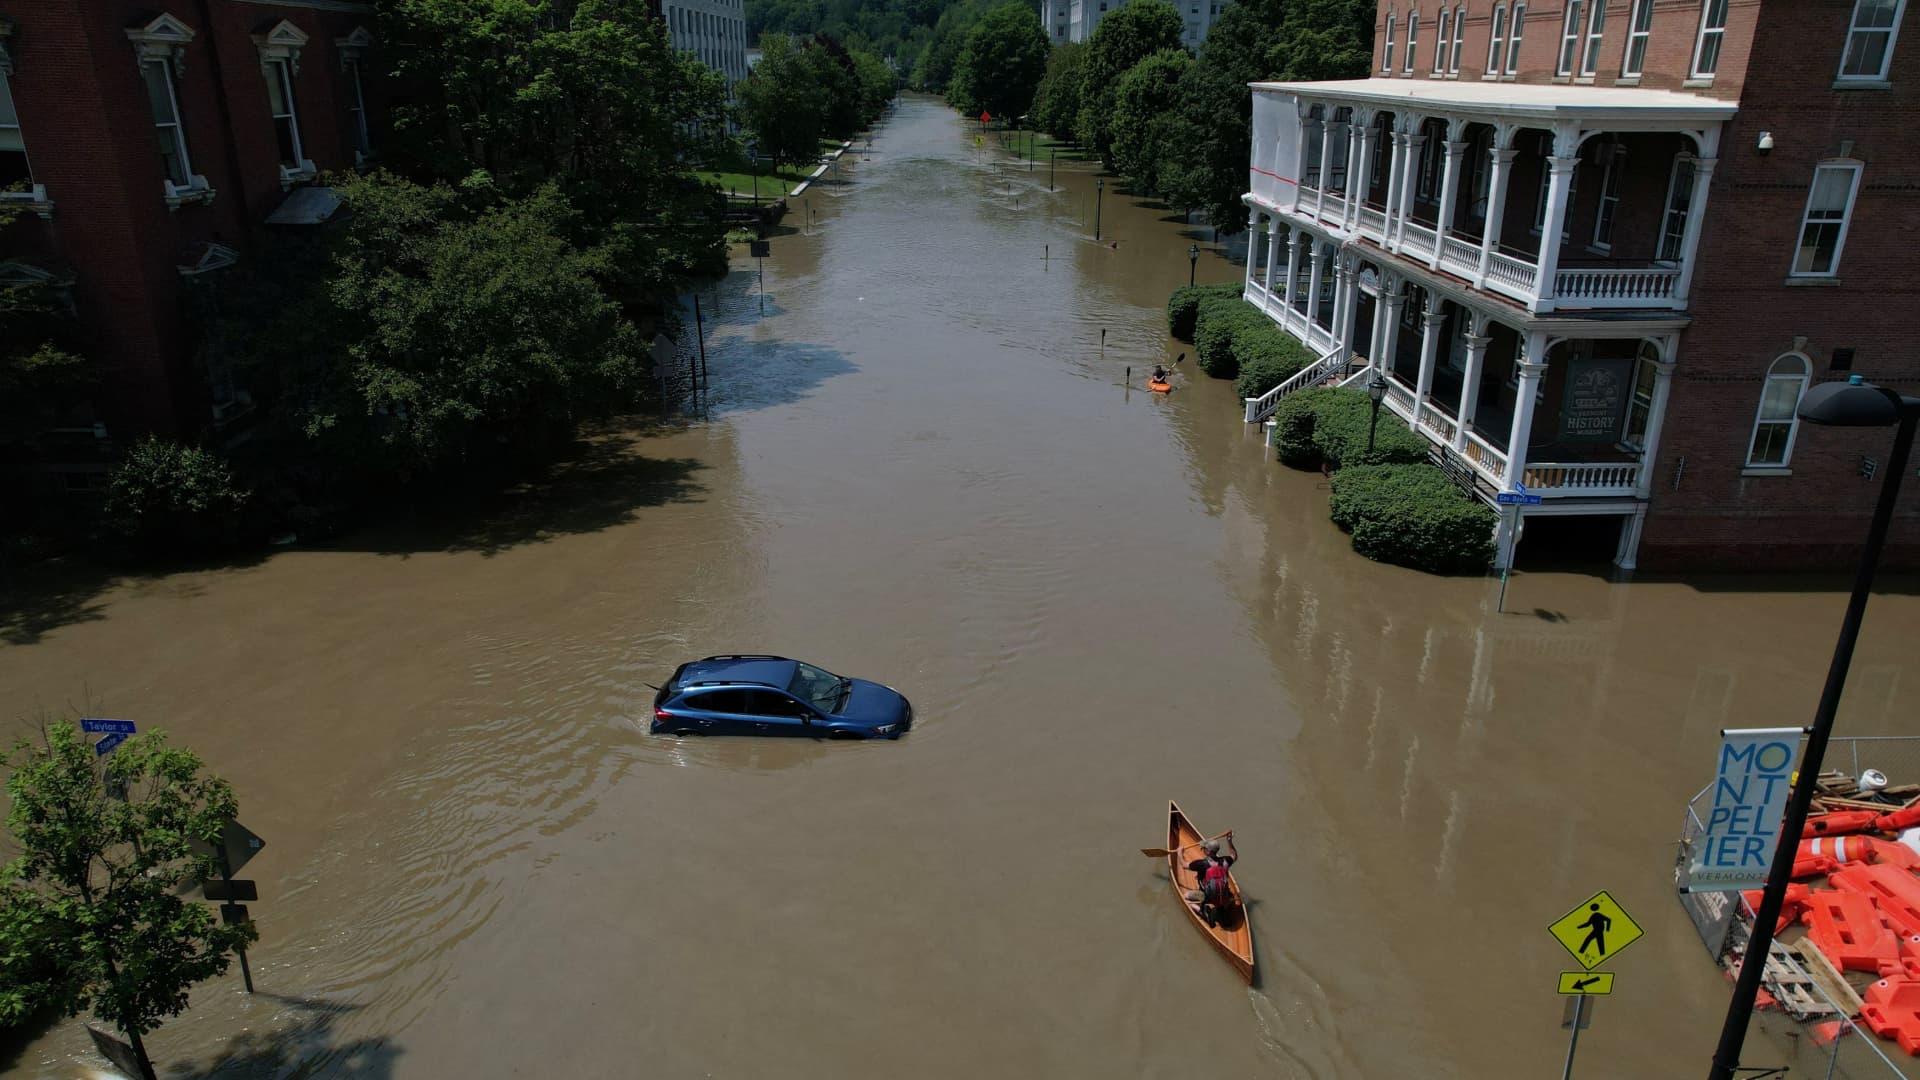 A person paddles a canoe down a street flooded by recent rain storms in Montpelier, Vermont, July 11, 2023.